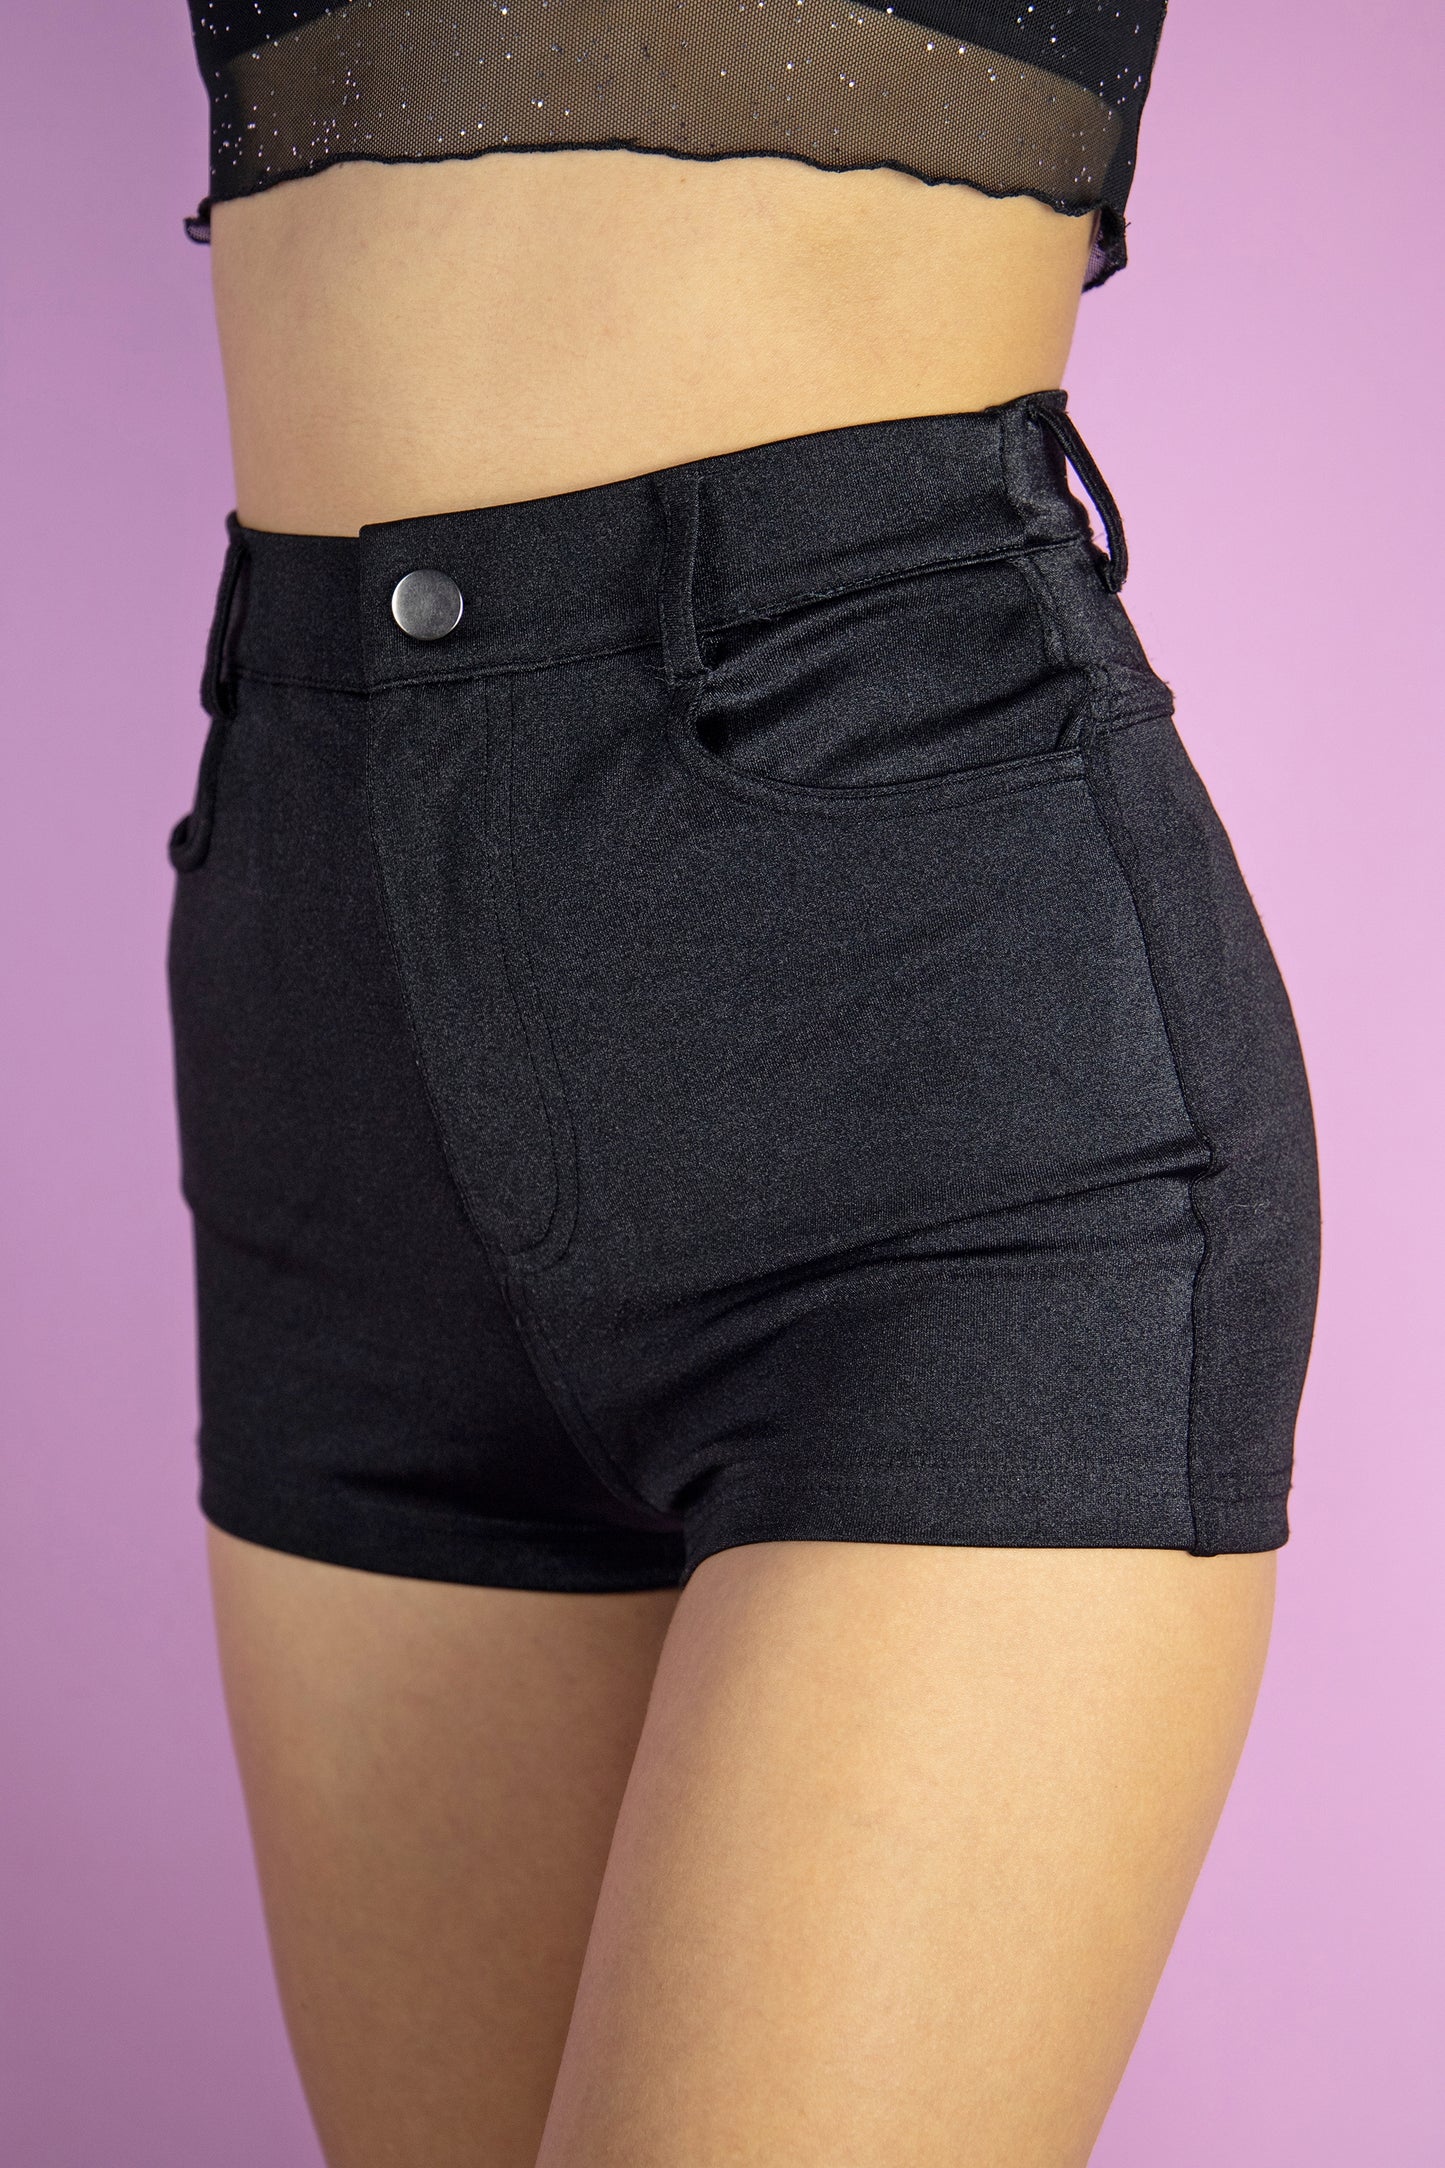 The Y2K Black Booty Shorts are vintage high waisted shiny black stretch shorts with pockets. Cyber party night 2000s shorts.